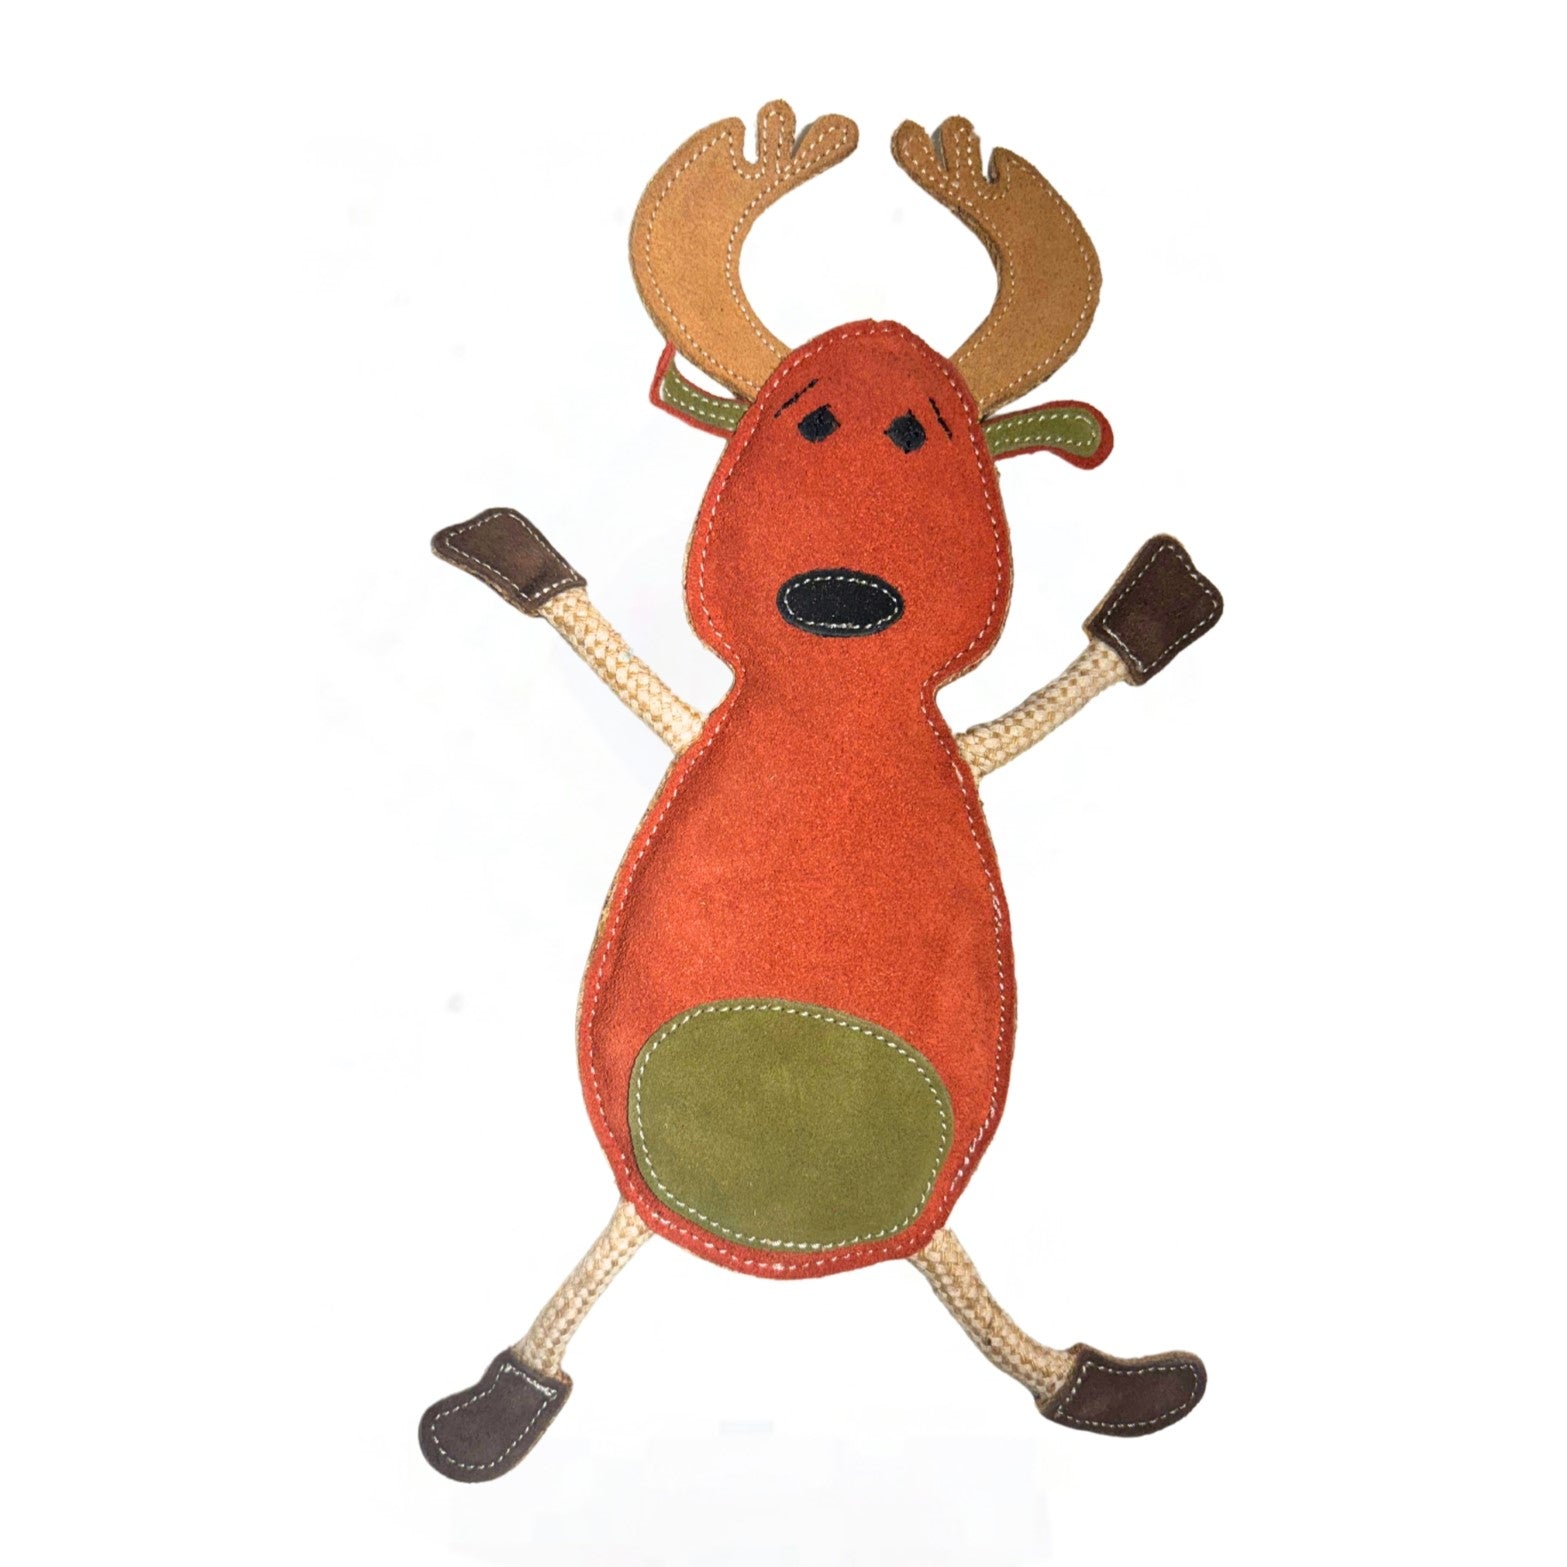 A whimsical, cartoon-like plush toy resembling Ed the green belly Moose, with oversized antlers, a bright orange body made from eco-friendly buffalo suede, green belly patch, and a simple, charming face, isolated.